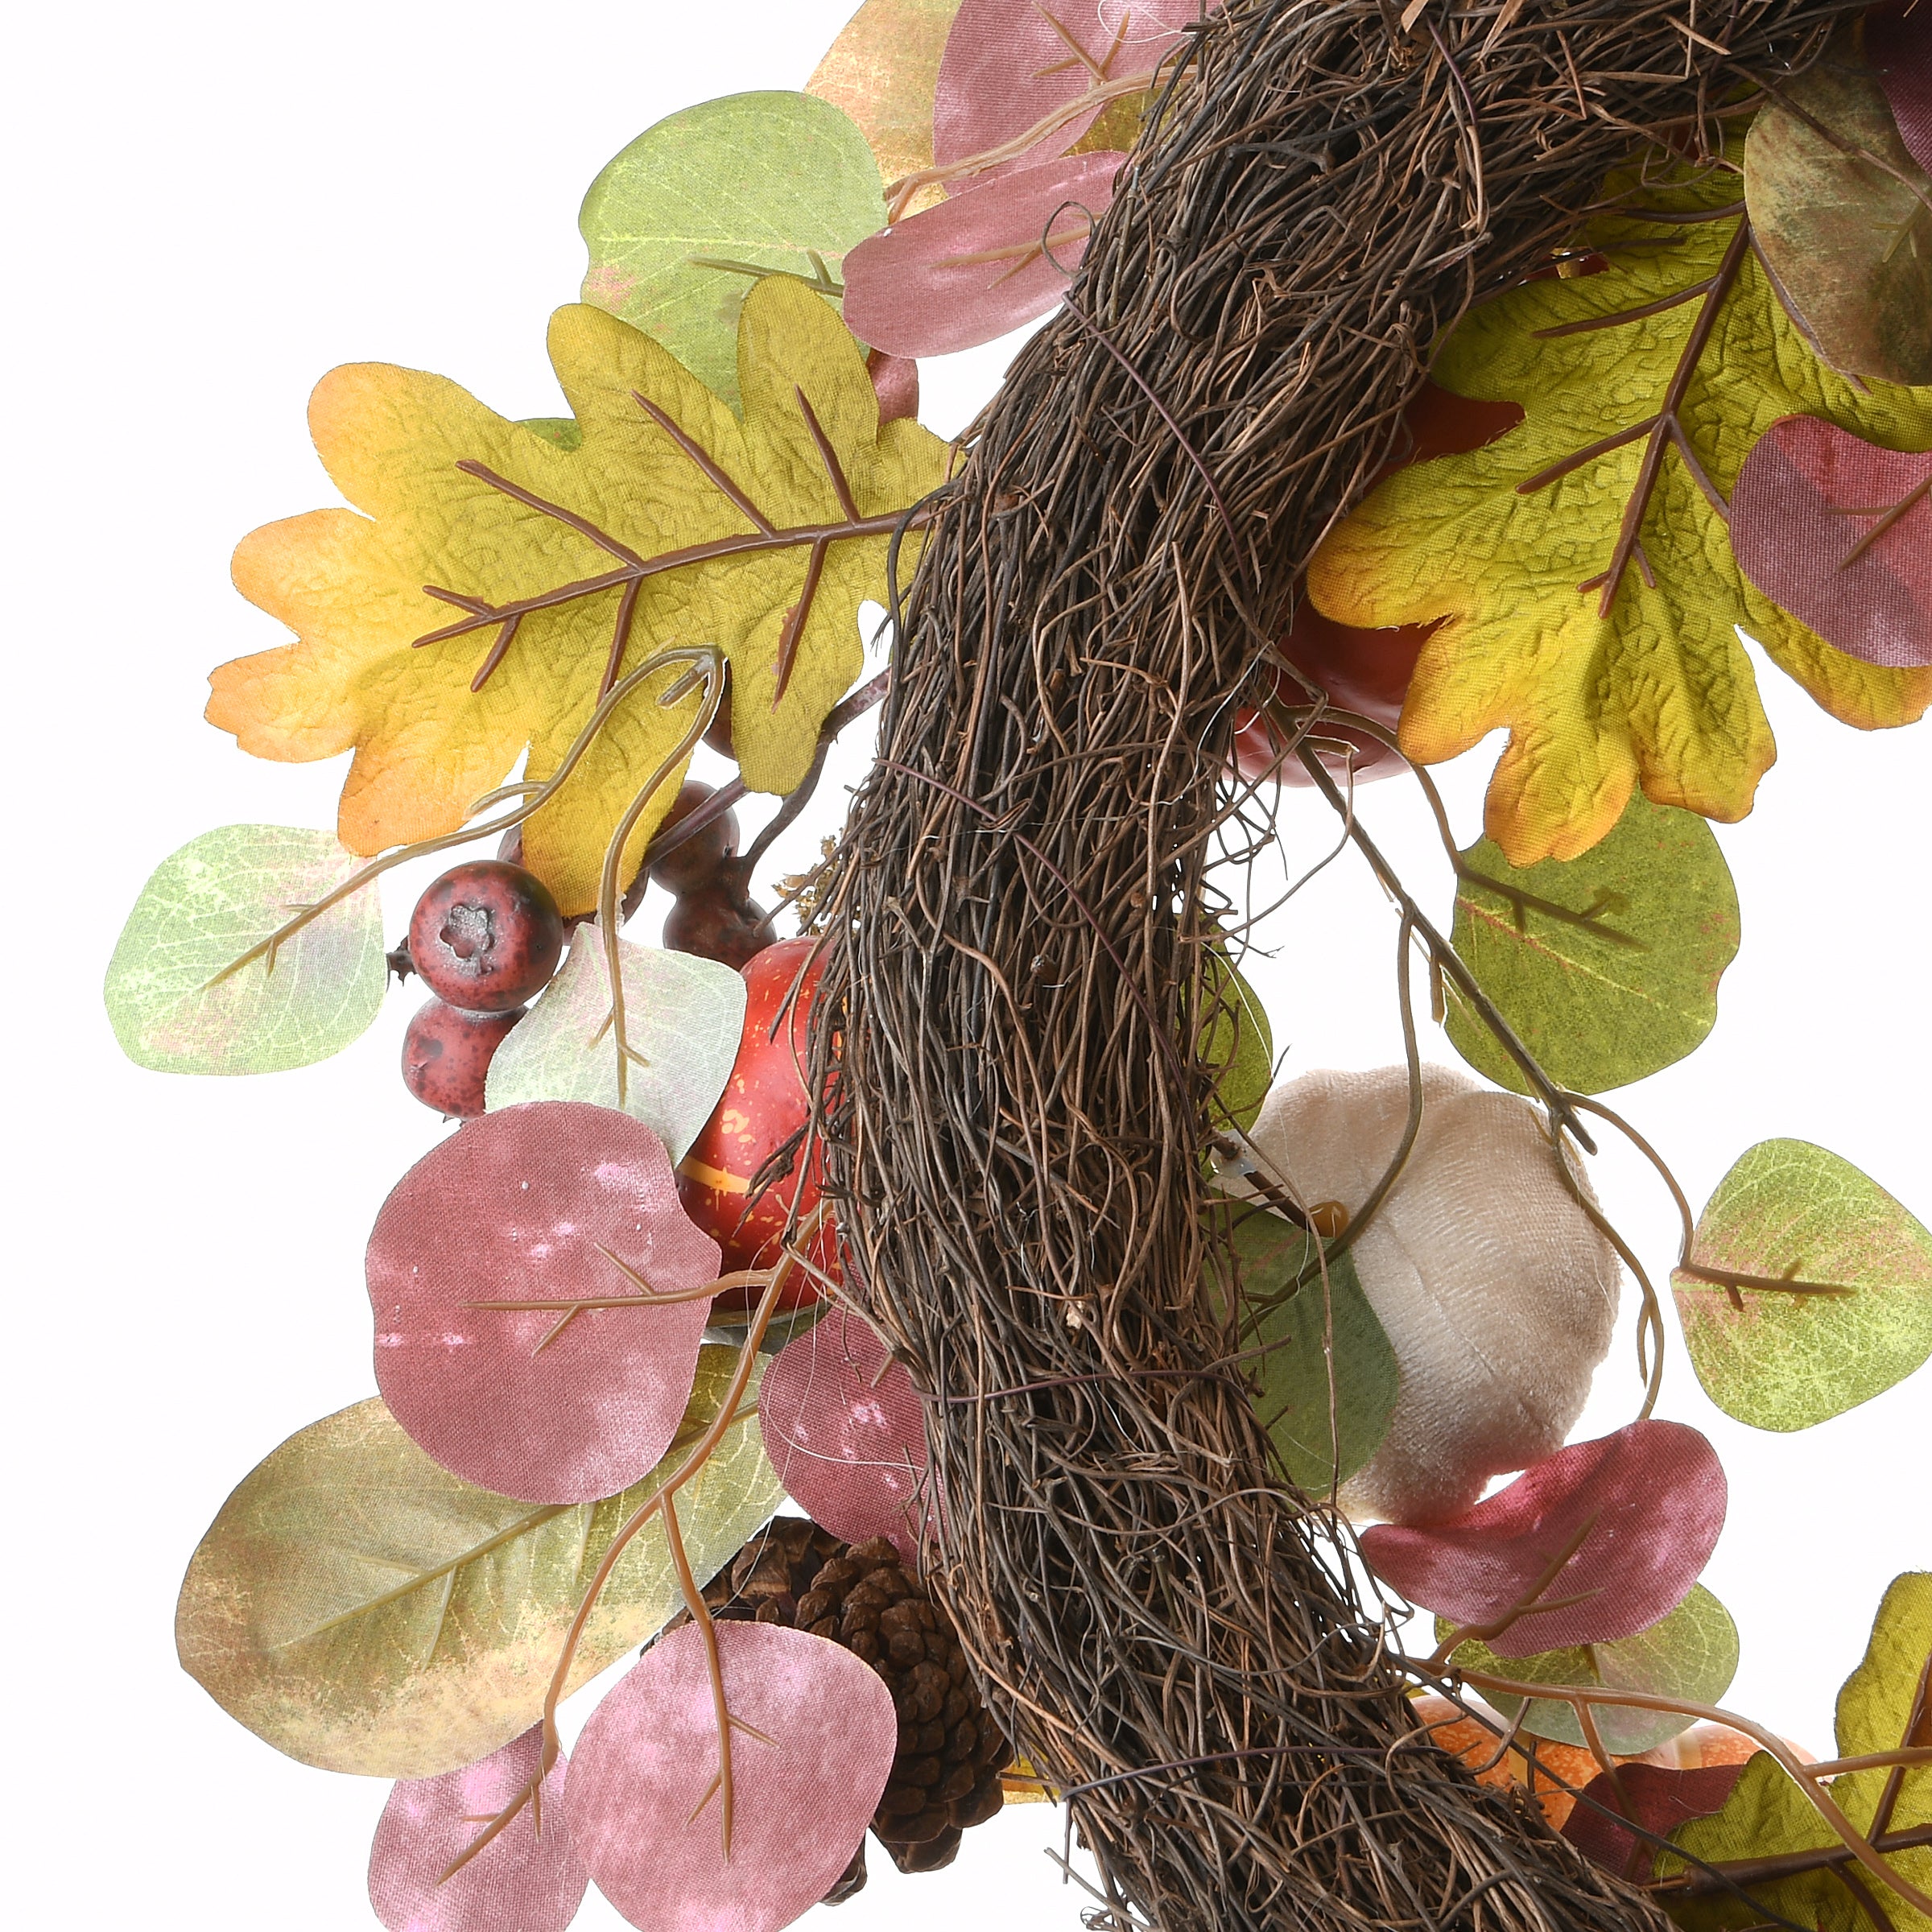 Artificial Autumn Wreath, Decorated with Miniature Pumpkins, Pine Cones, Berry Clusters, Leaves, Autumn Collection, 22 Inches